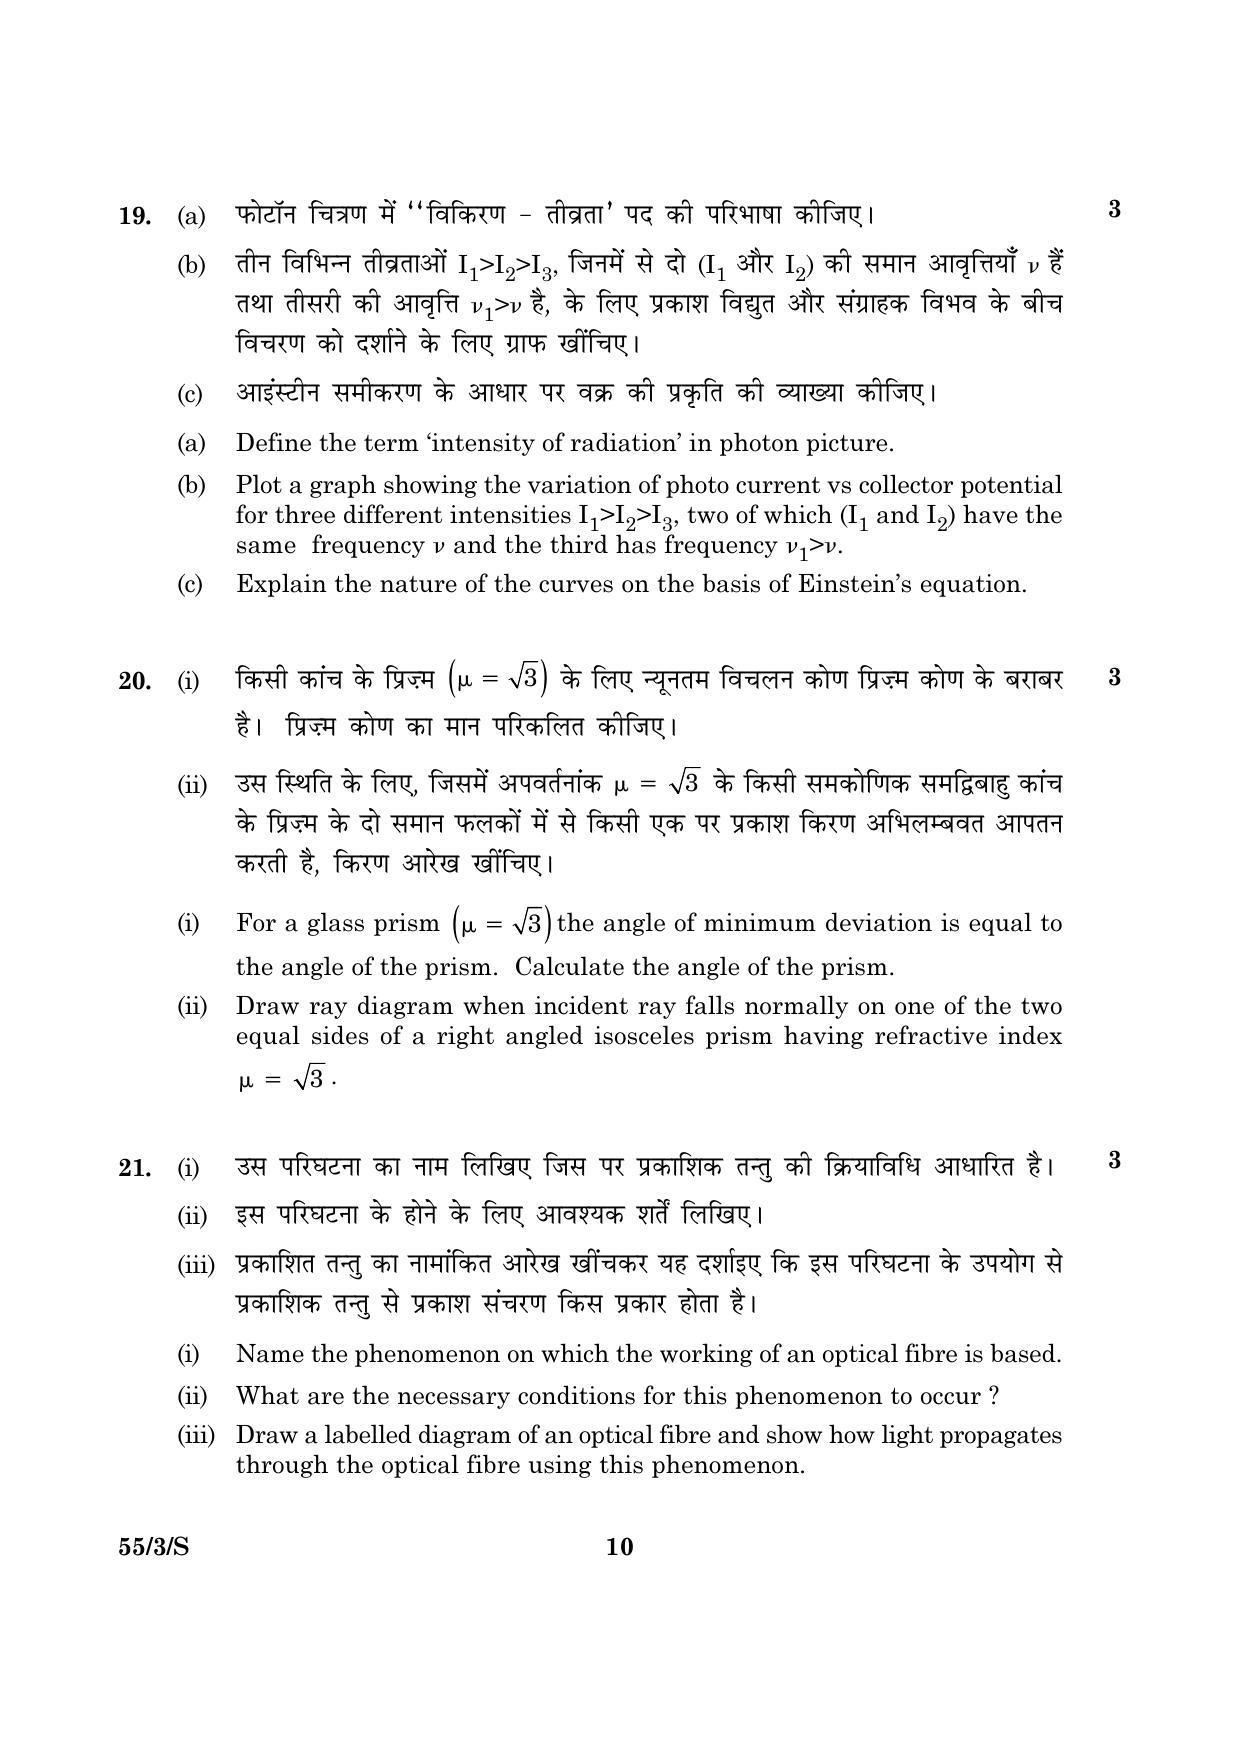 CBSE Class 12 055 Set 3 S Physics Theory 2016 Question Paper - Page 10